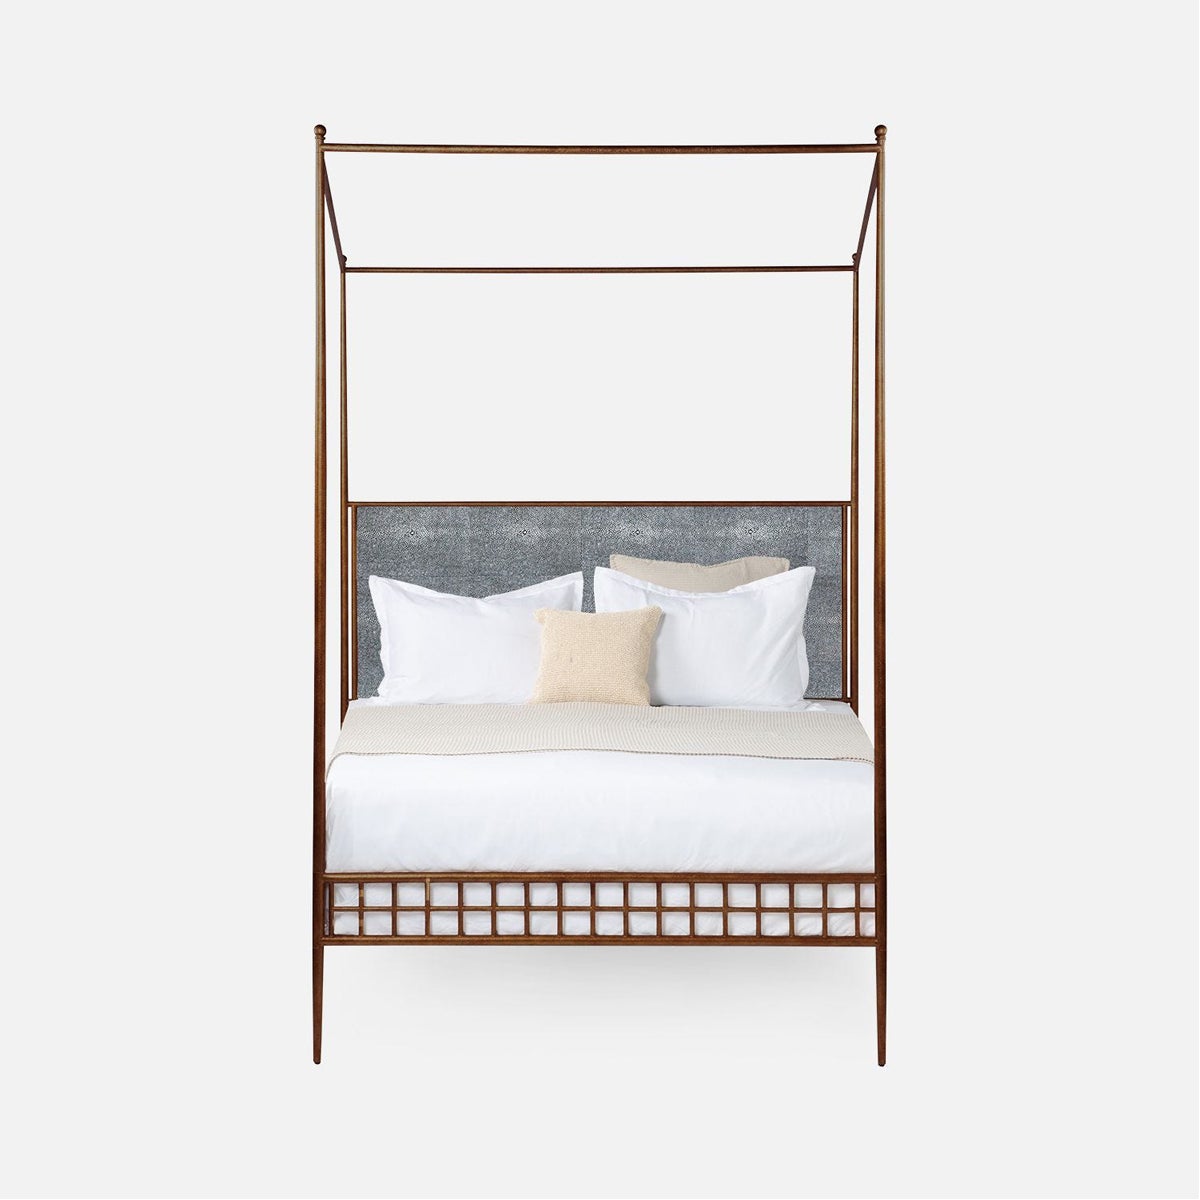 Made Goods Hamilton Textured Iron Canopy Bed in Aras Mohair